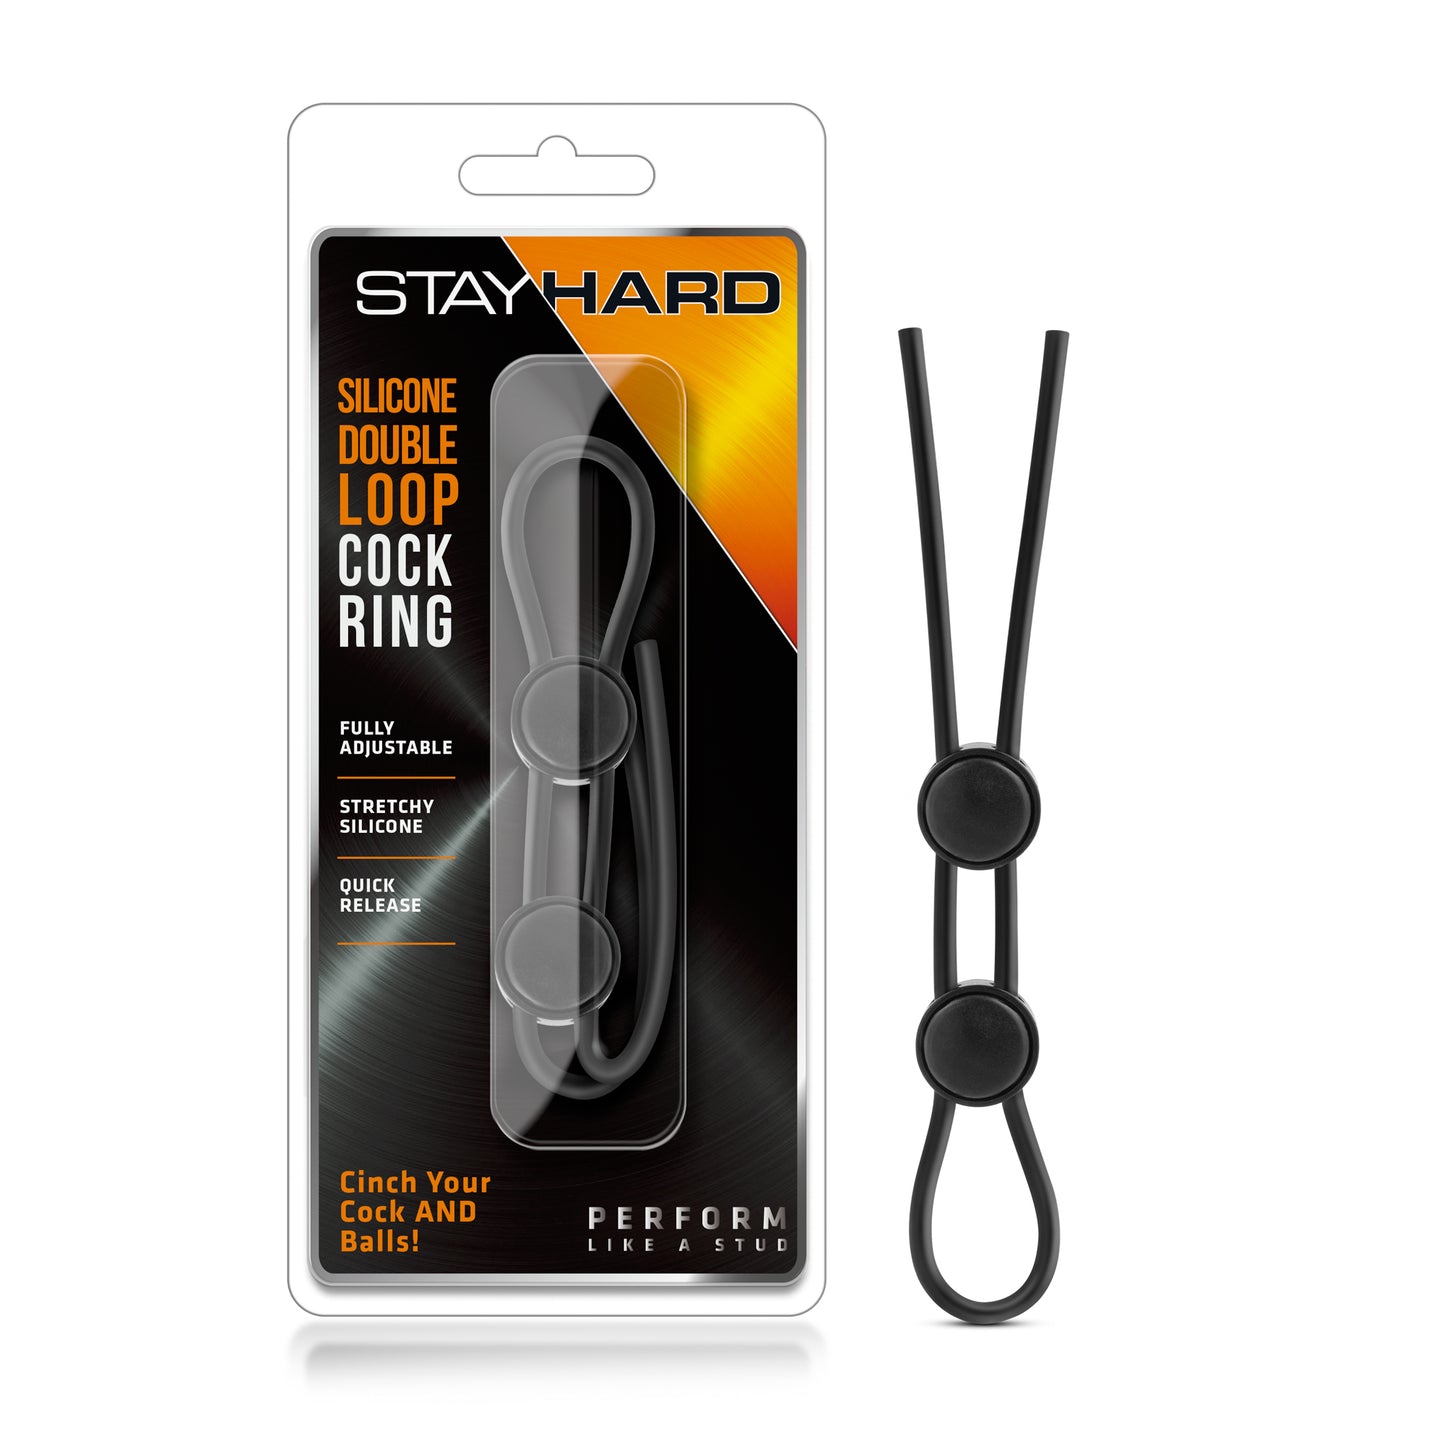 Stay Hard - Silicone Double Loop Cock Ring.